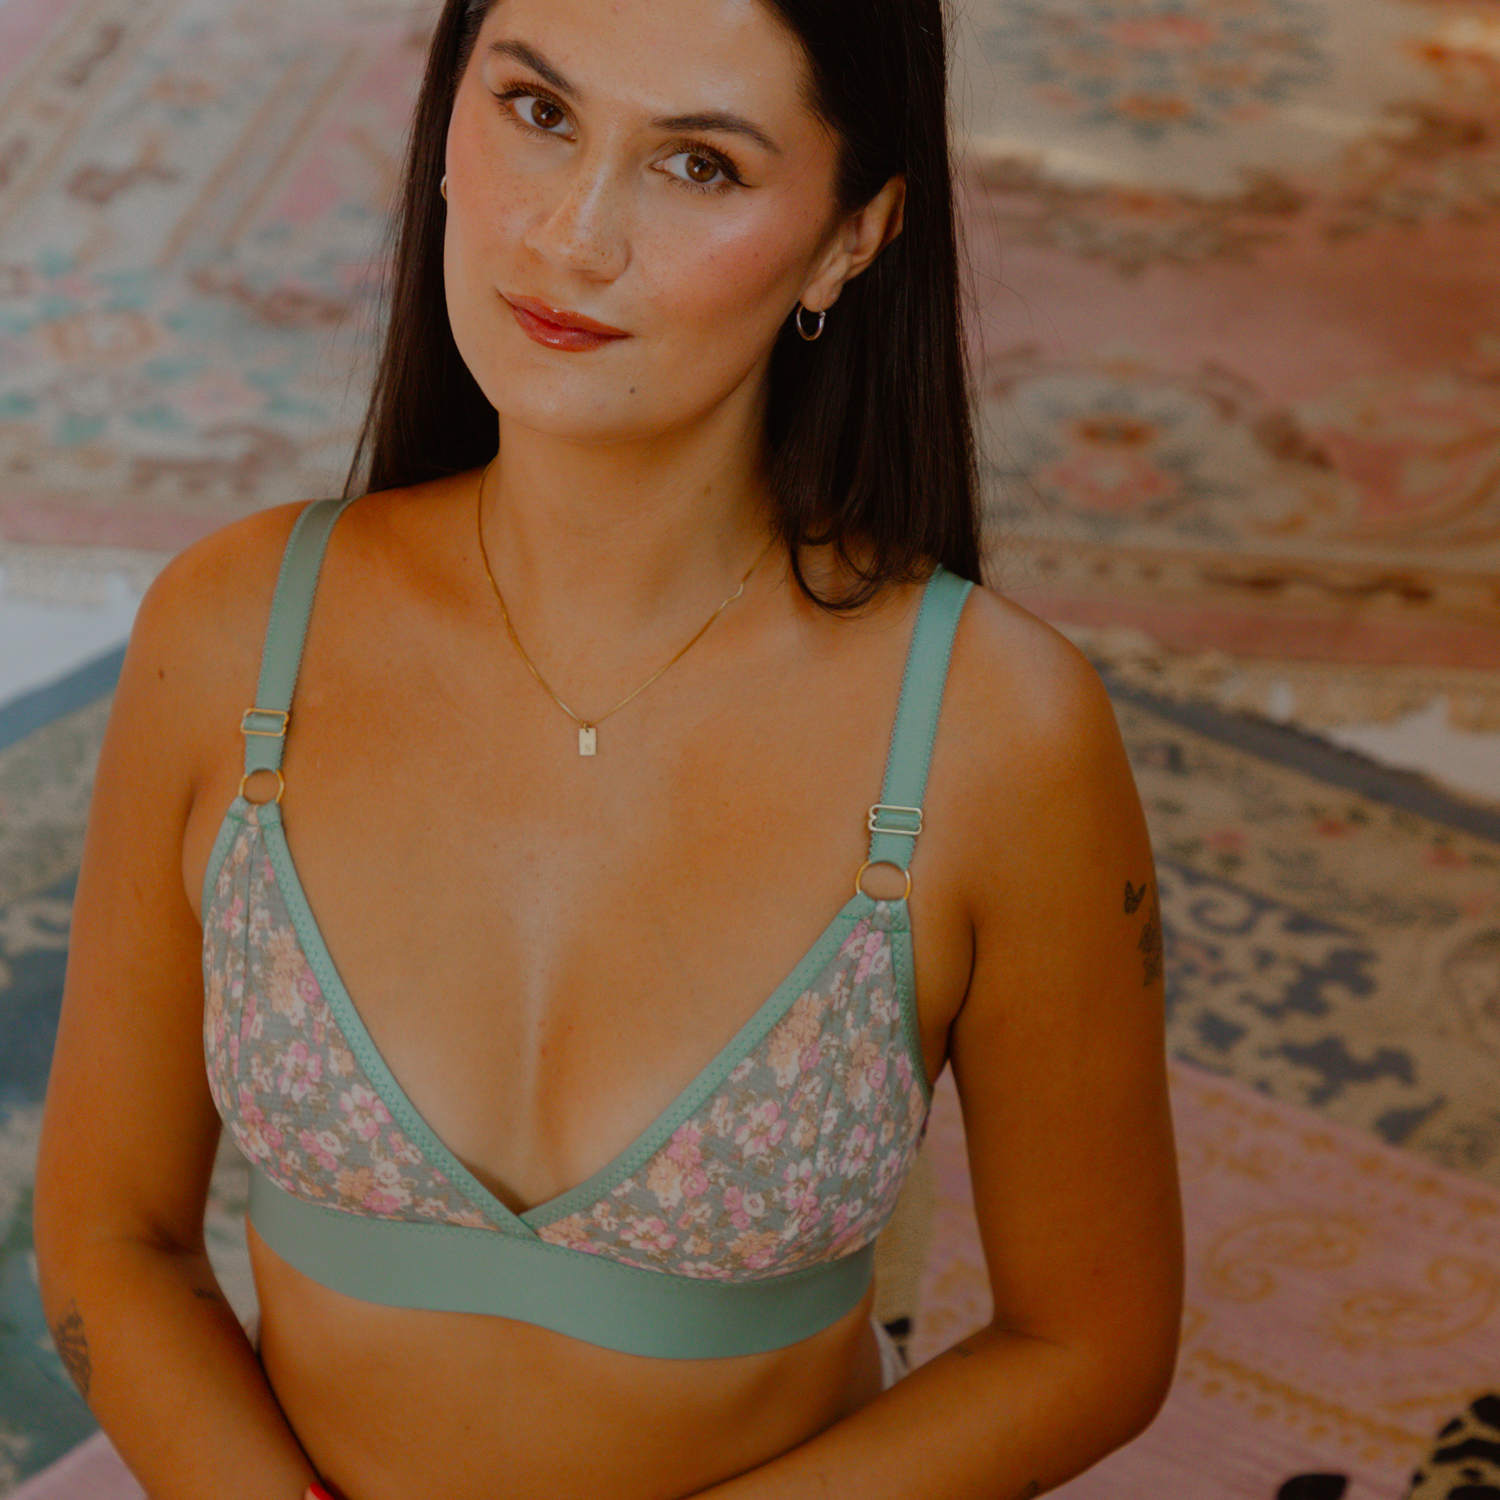 Barrett Bralette Sewing Kit: Lingerie Pattern to Sew at Home by